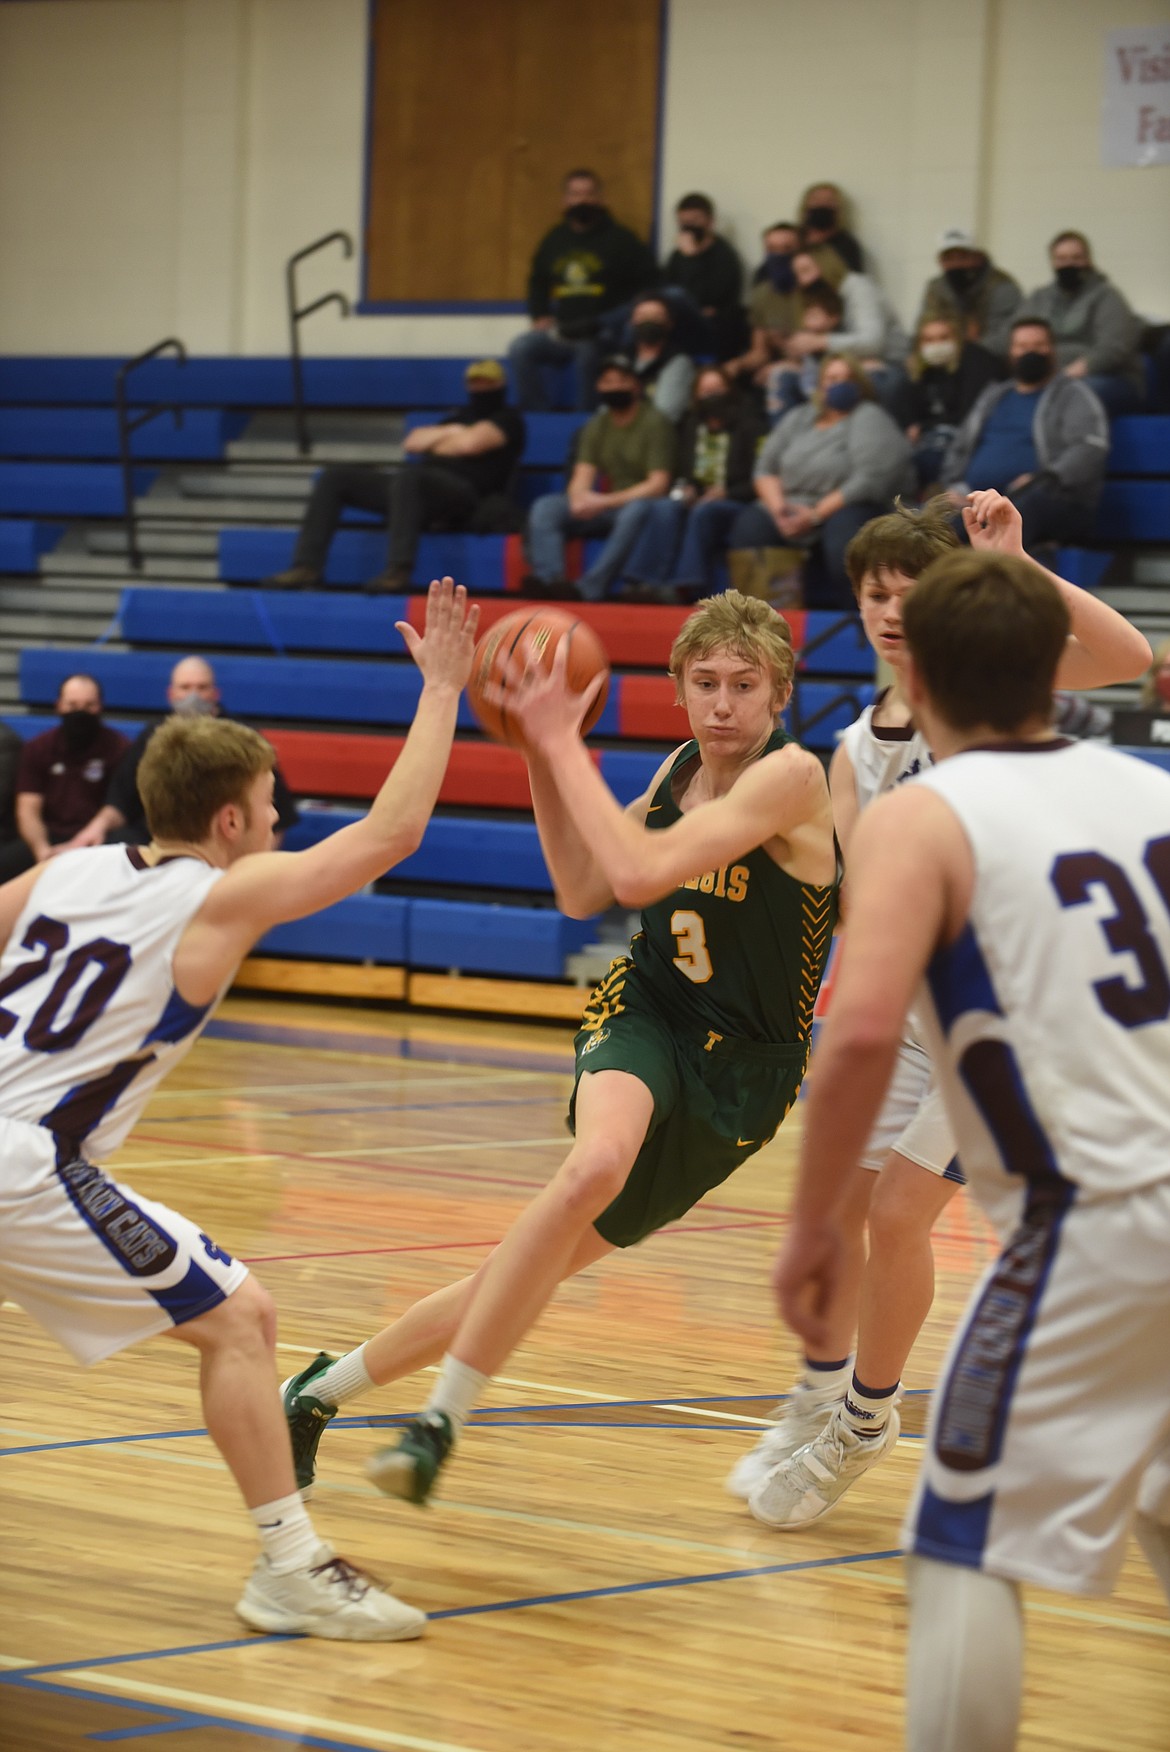 St. Regis senior forward Andrew Sanford helped the Tigers beat Clark Fork, 58-55, Saturday night for the District 14-C championship. Sanford scored 17 points and blocked several shots. (Scott Shindledecker/Valley Press)